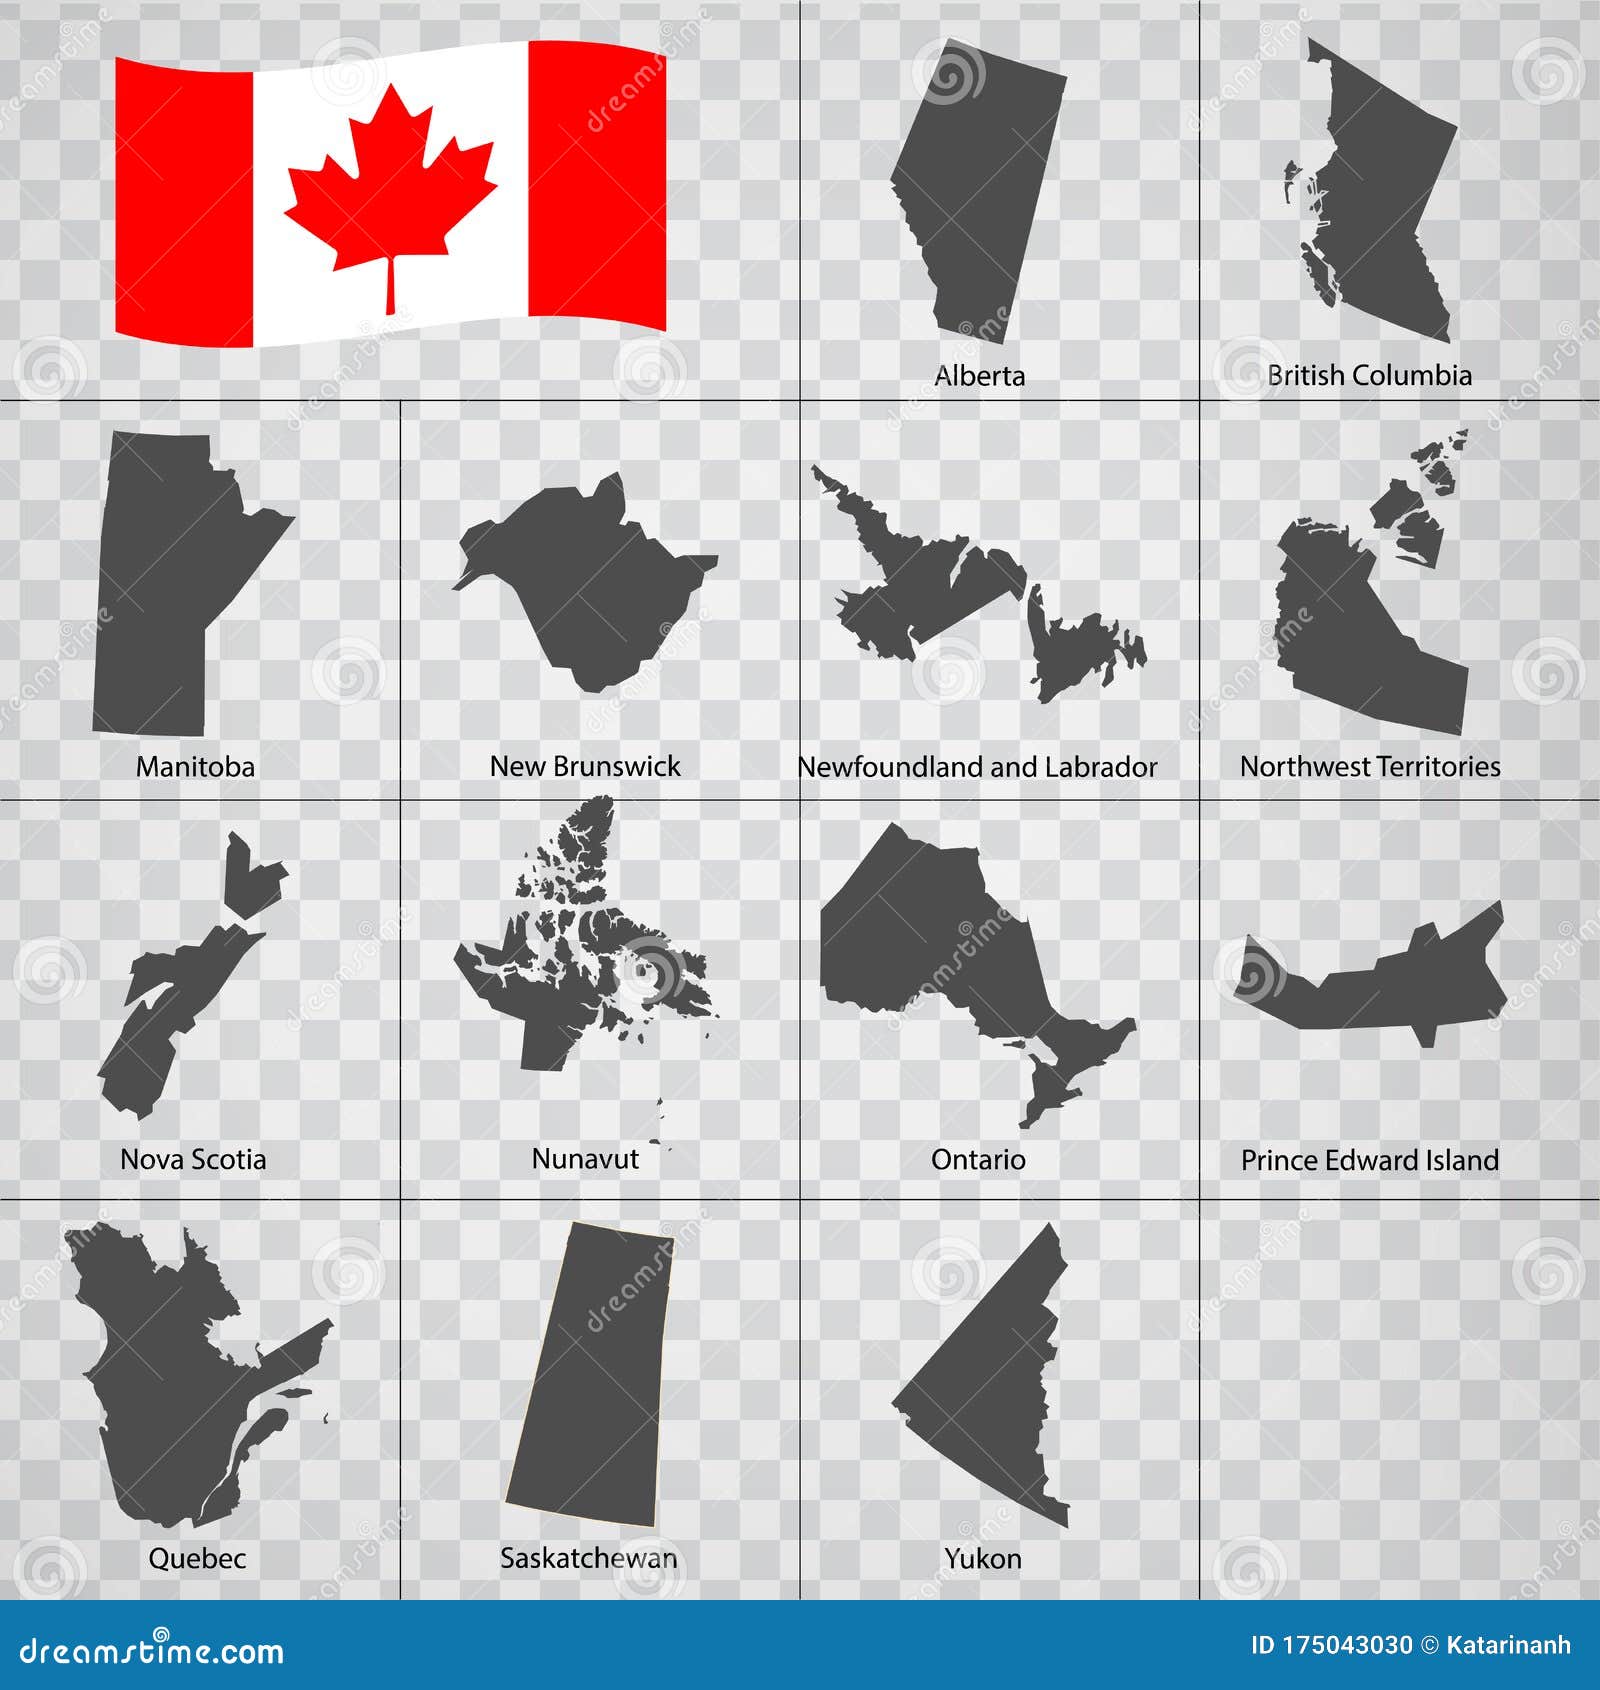 thirteen maps  provinces of canada - alphabetical order with name. every single map of  province are listed and  with word